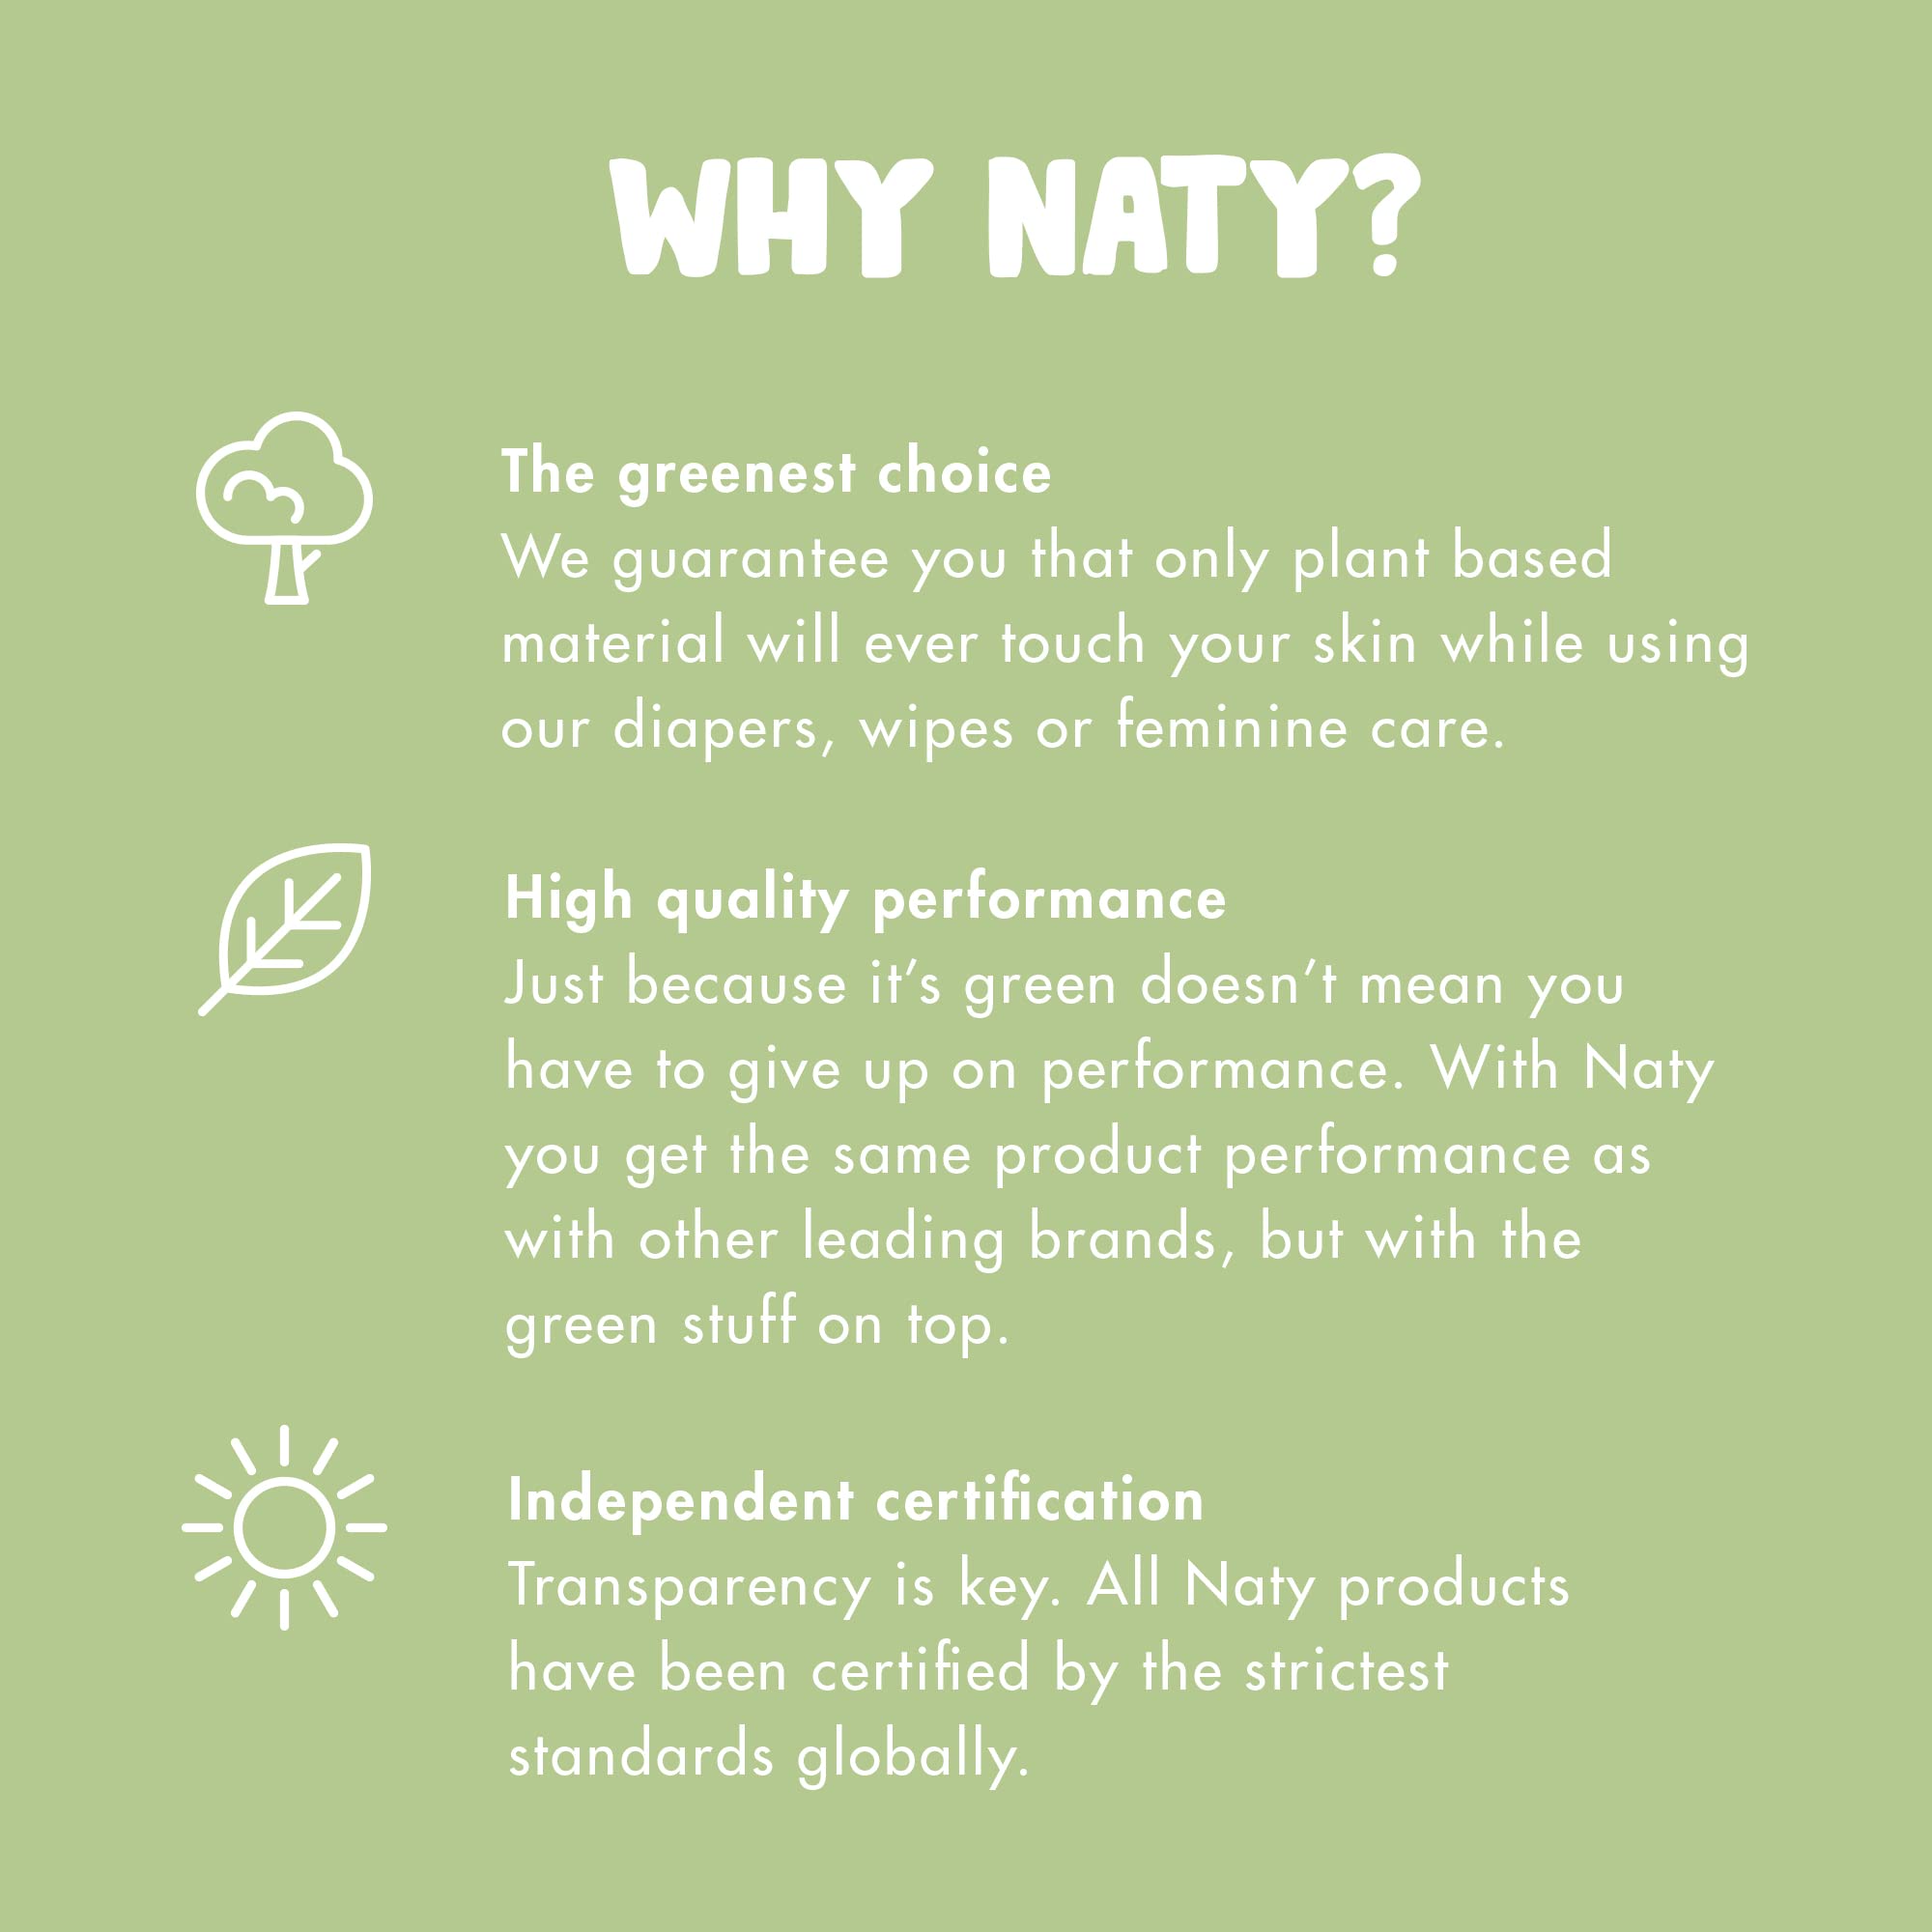 Eco by Naty Flushable Baby Wipes - Compostable and Plant-Based Wipes, Chemical-Free and Hypoallergenic Baby Wipes Safe for Baby Sensitive Skin, 42 Wipes Per Pack (12 Pk)